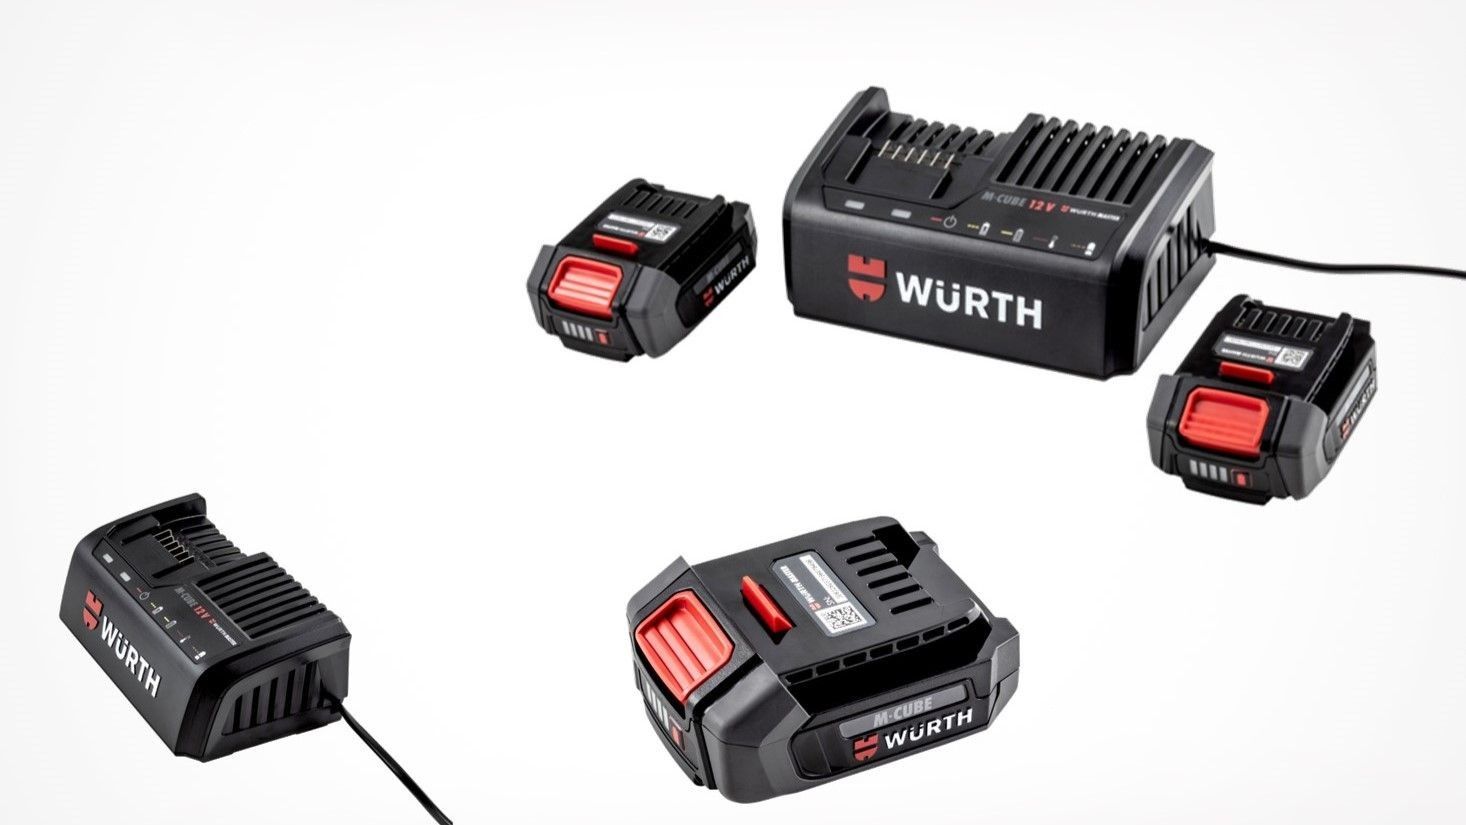 Battery chargers from Würth